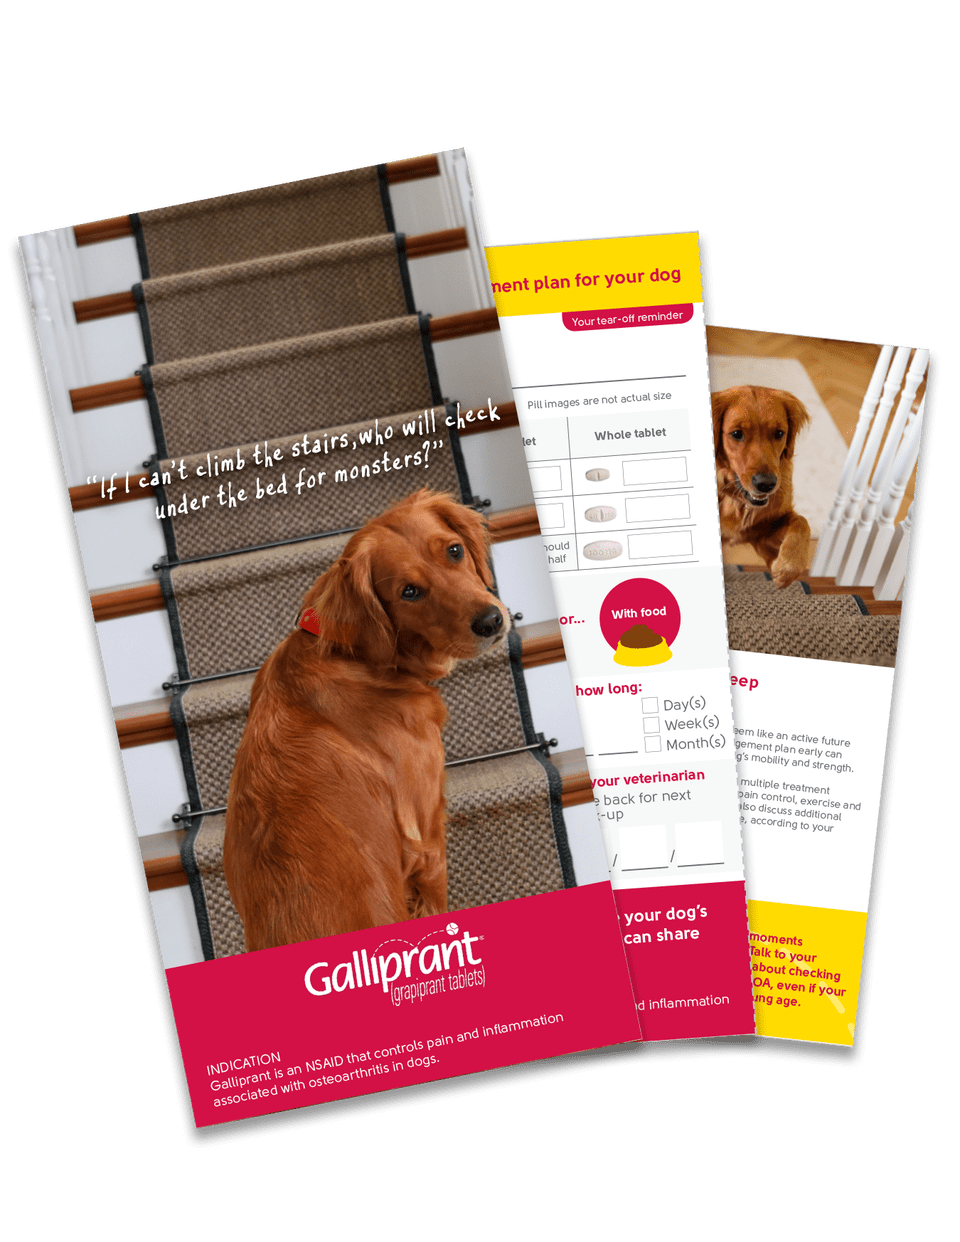 galliprant tablets for dogs